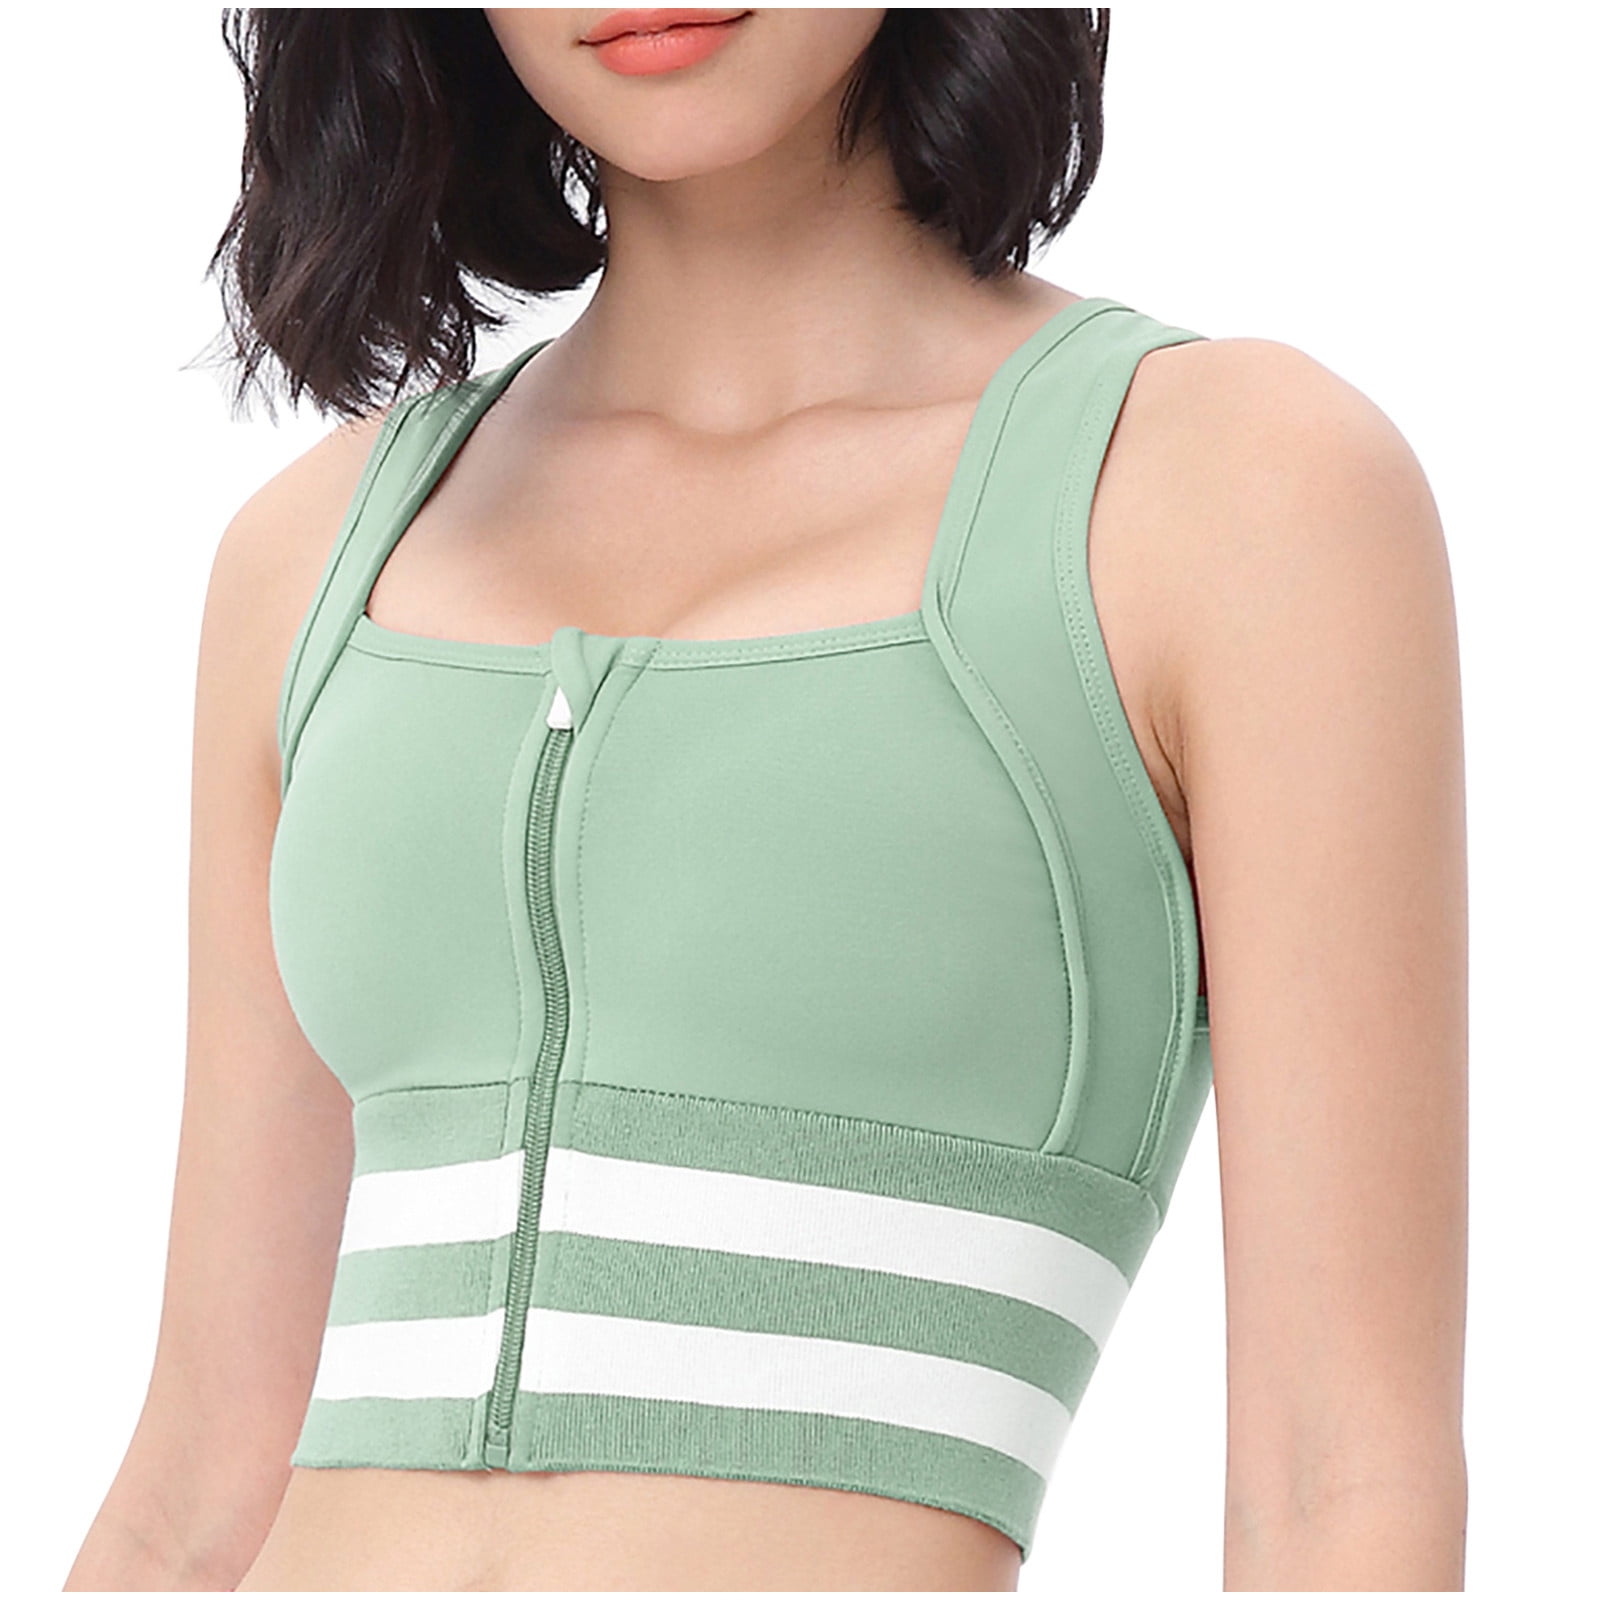 Lindreshi Sports Bras for Women Front Closure High Impact Women's